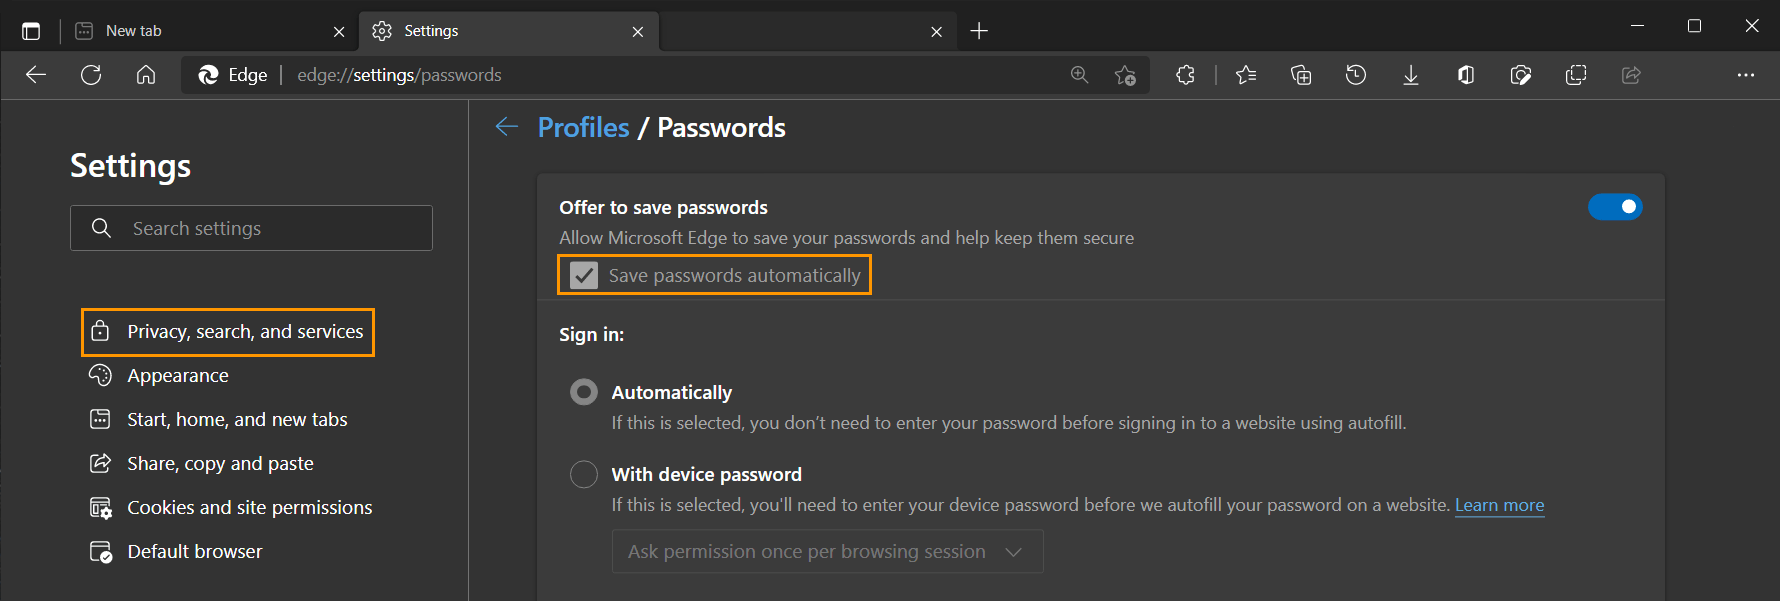 Edge always save password without a prompt